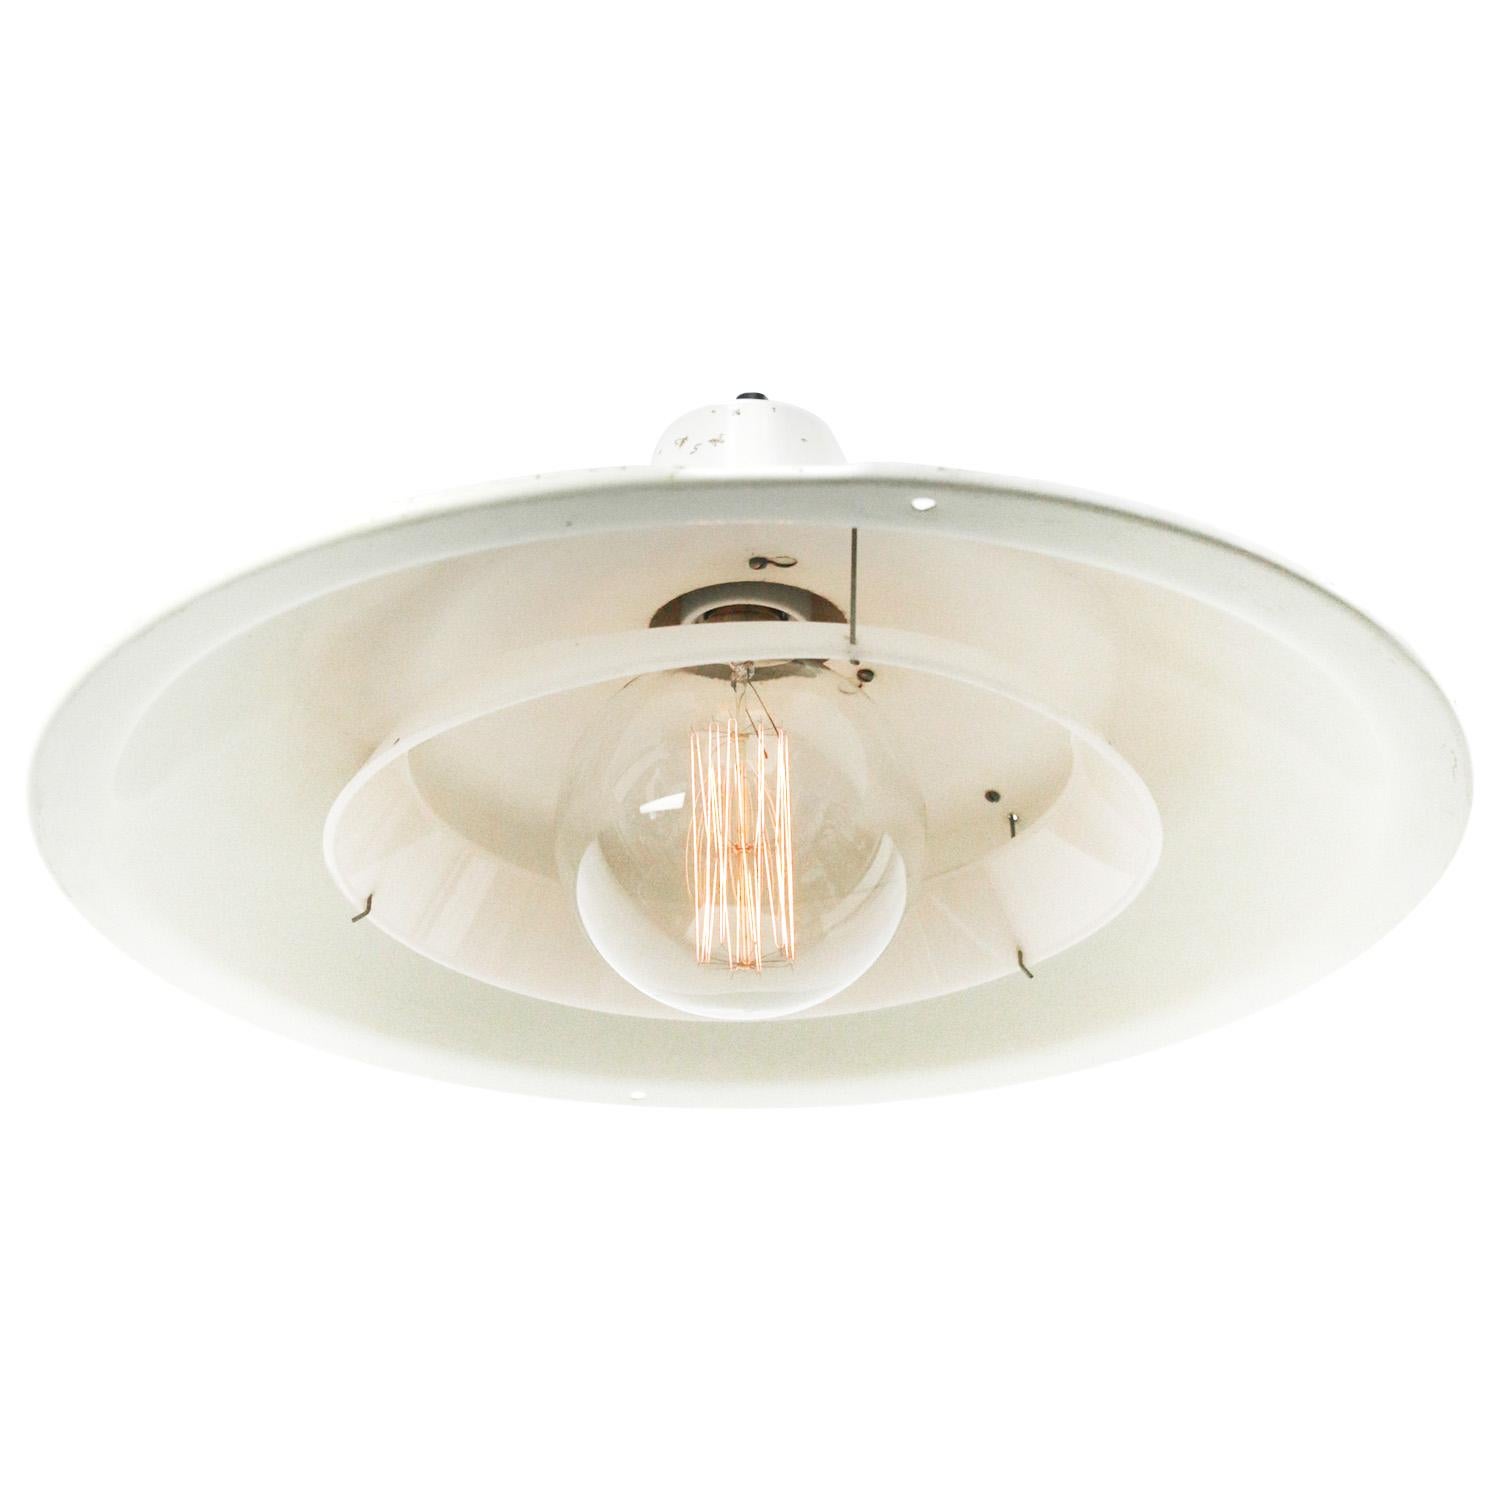 Dutch industrial factory pendant light by Philips, Louis Kalff
white metal, white interior. Transparent plastic ring

Weight: 1.40 kg / 3.1 lb

Priced per individual item. All lamps have been made suitable by international standards for